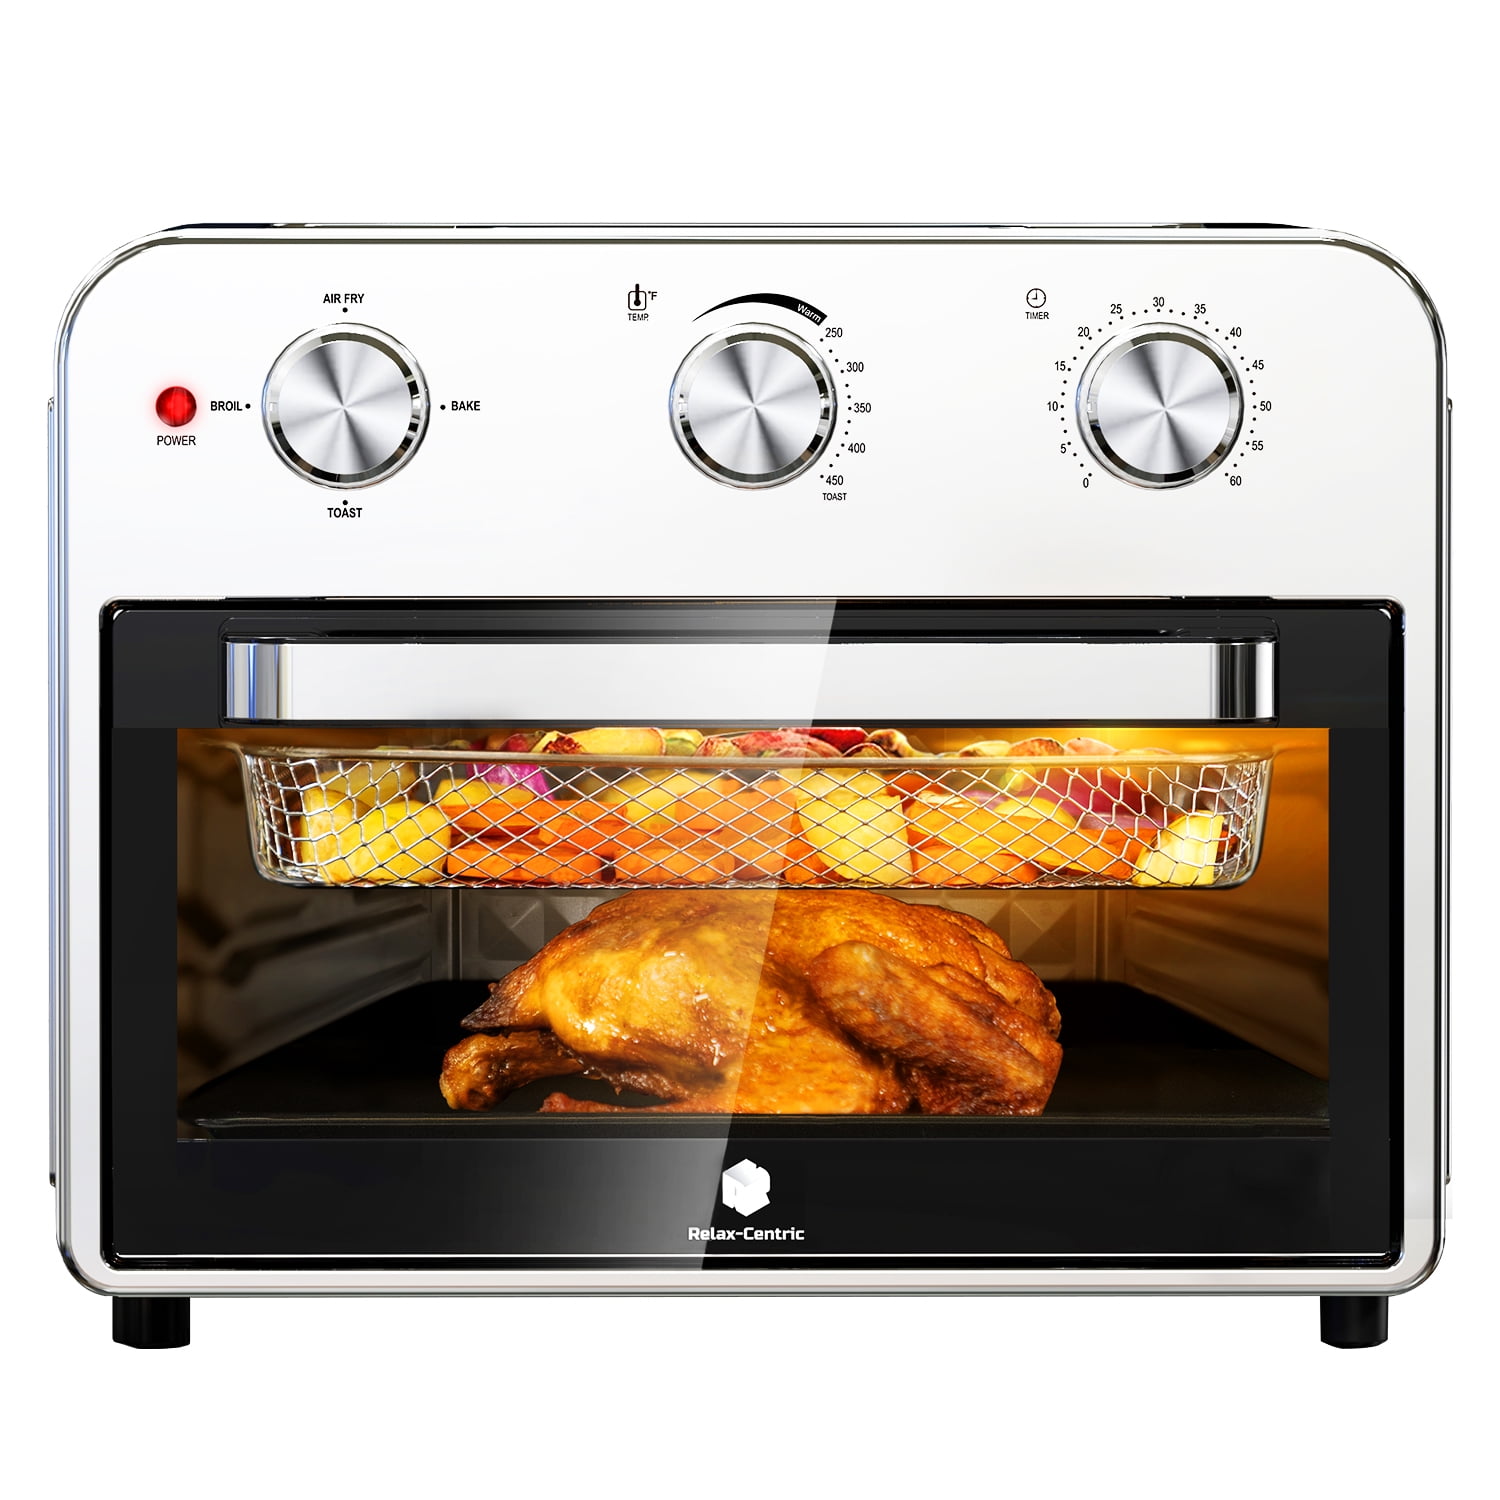 BENTISM 7-IN-1 Air Fryer Toaster Oven Convection Oven Countertop